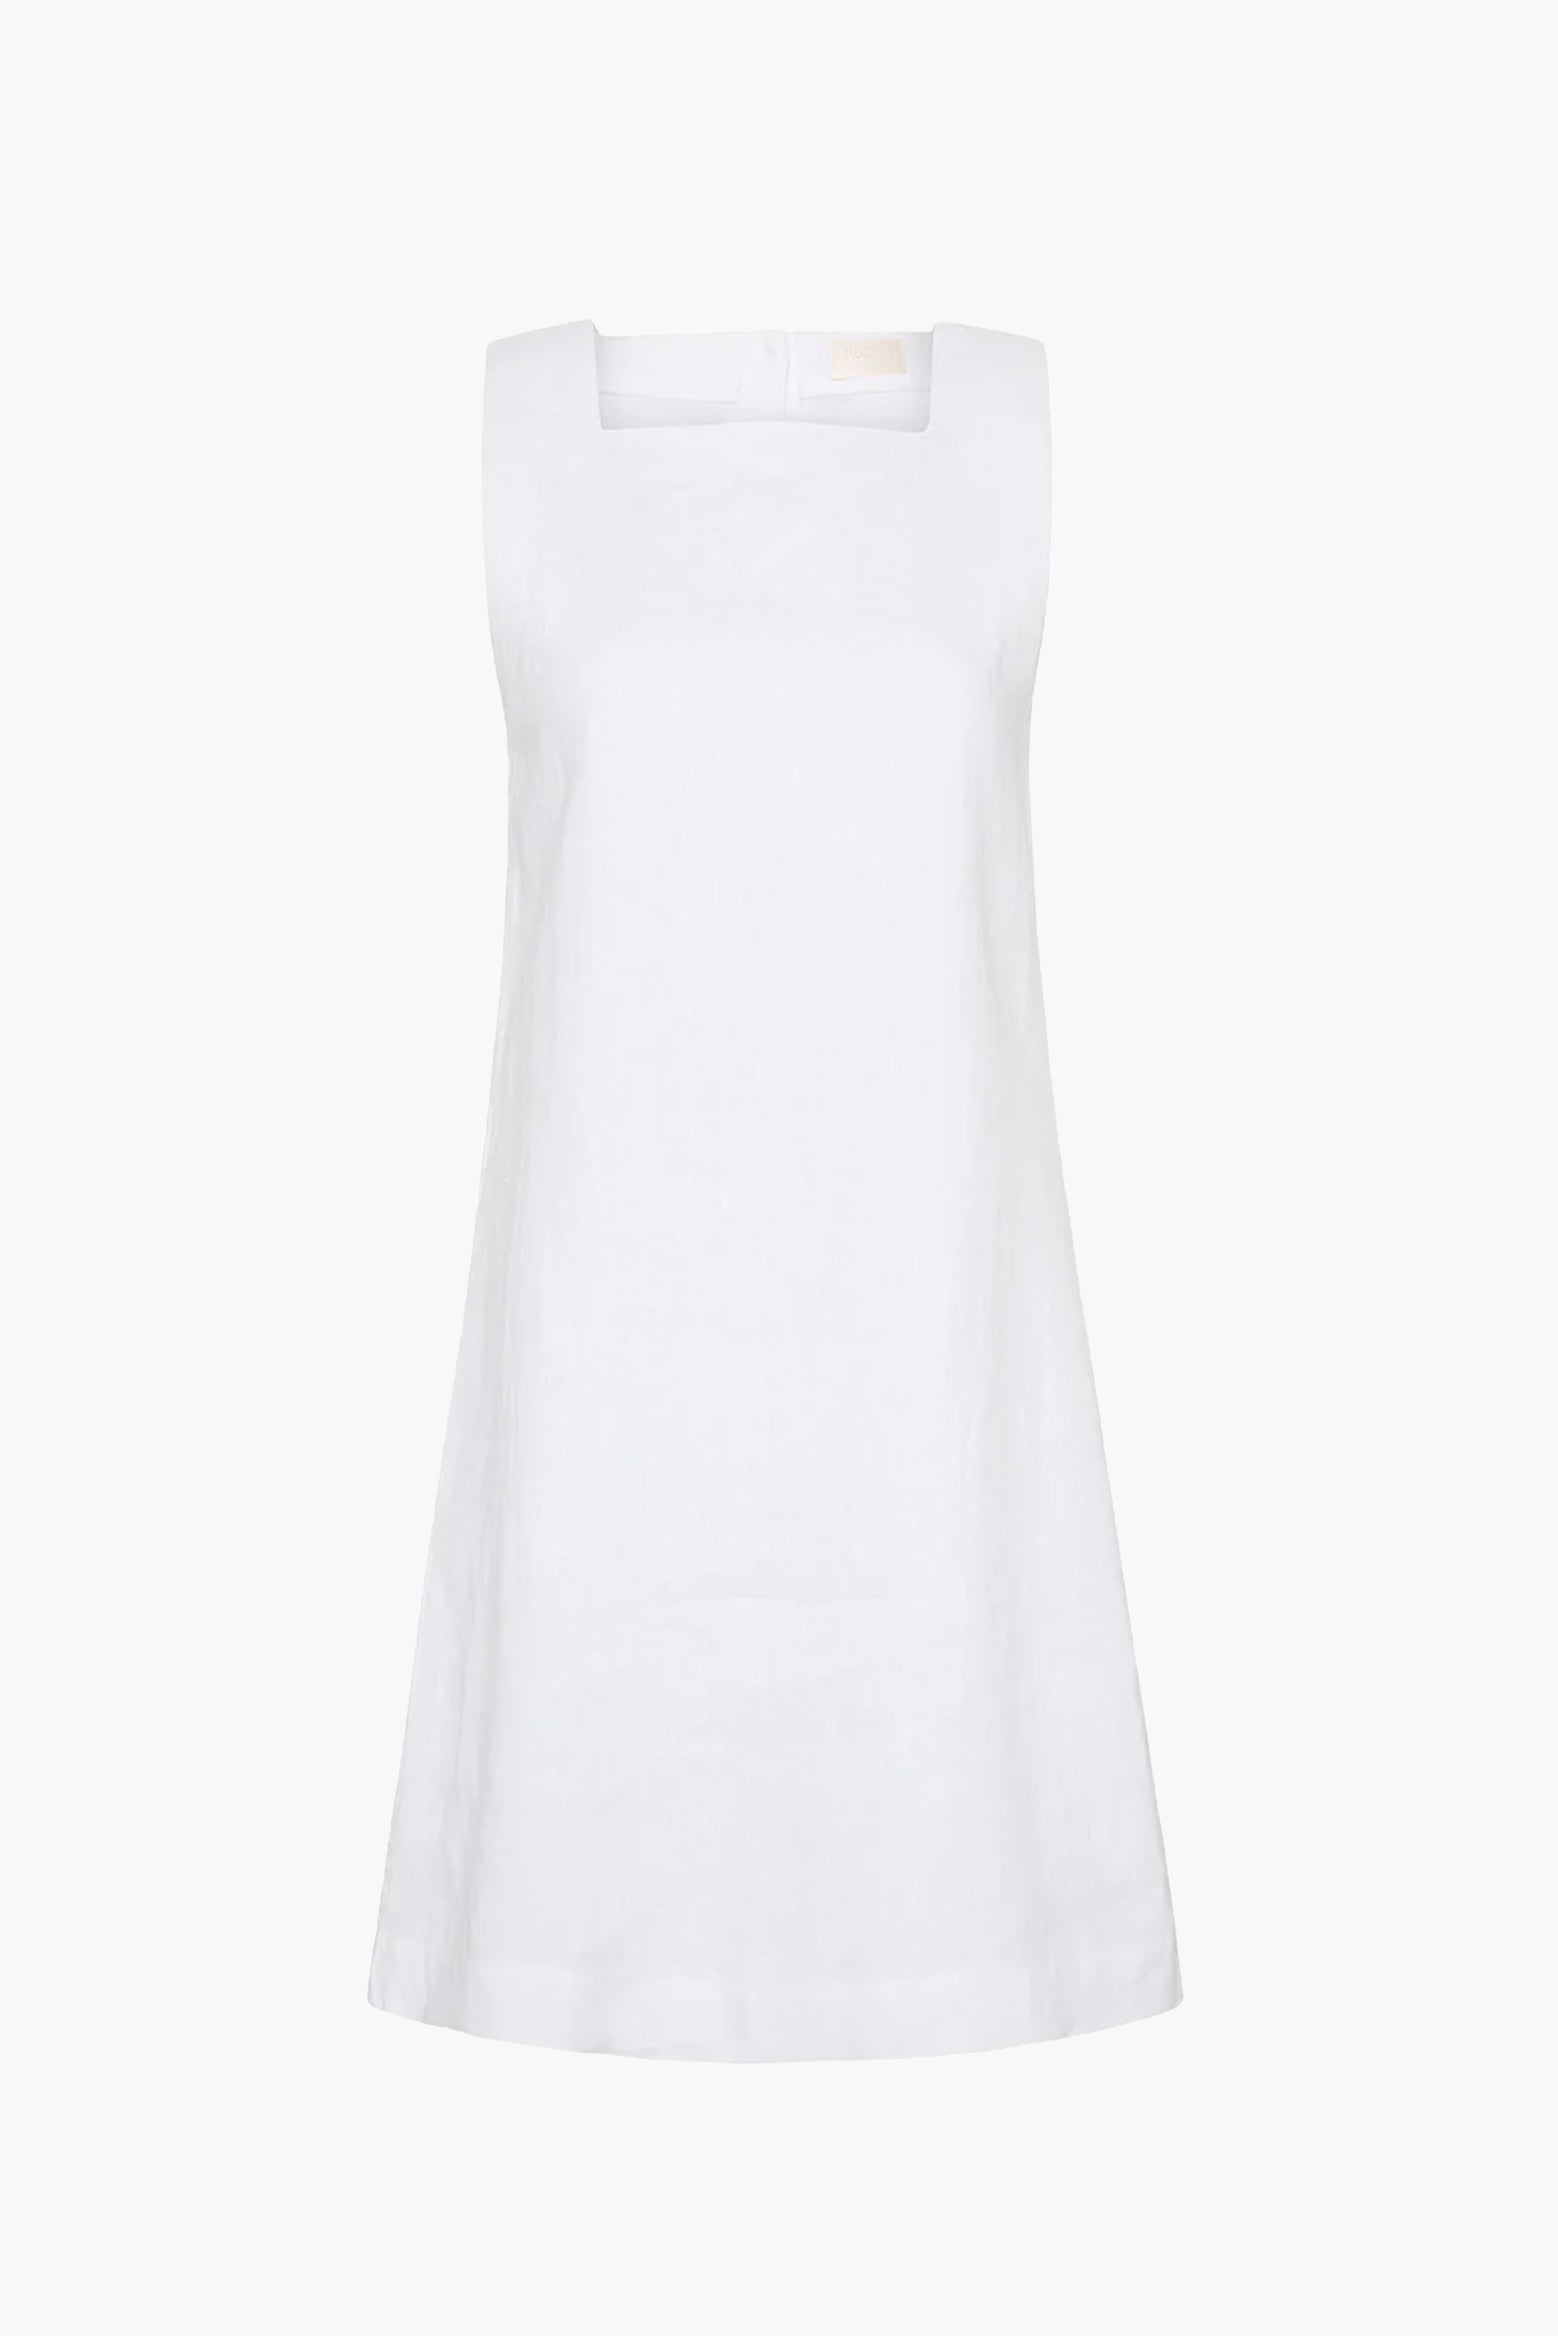 Posse Emma Shift Dress in Ivory available at The New Trend Australia.